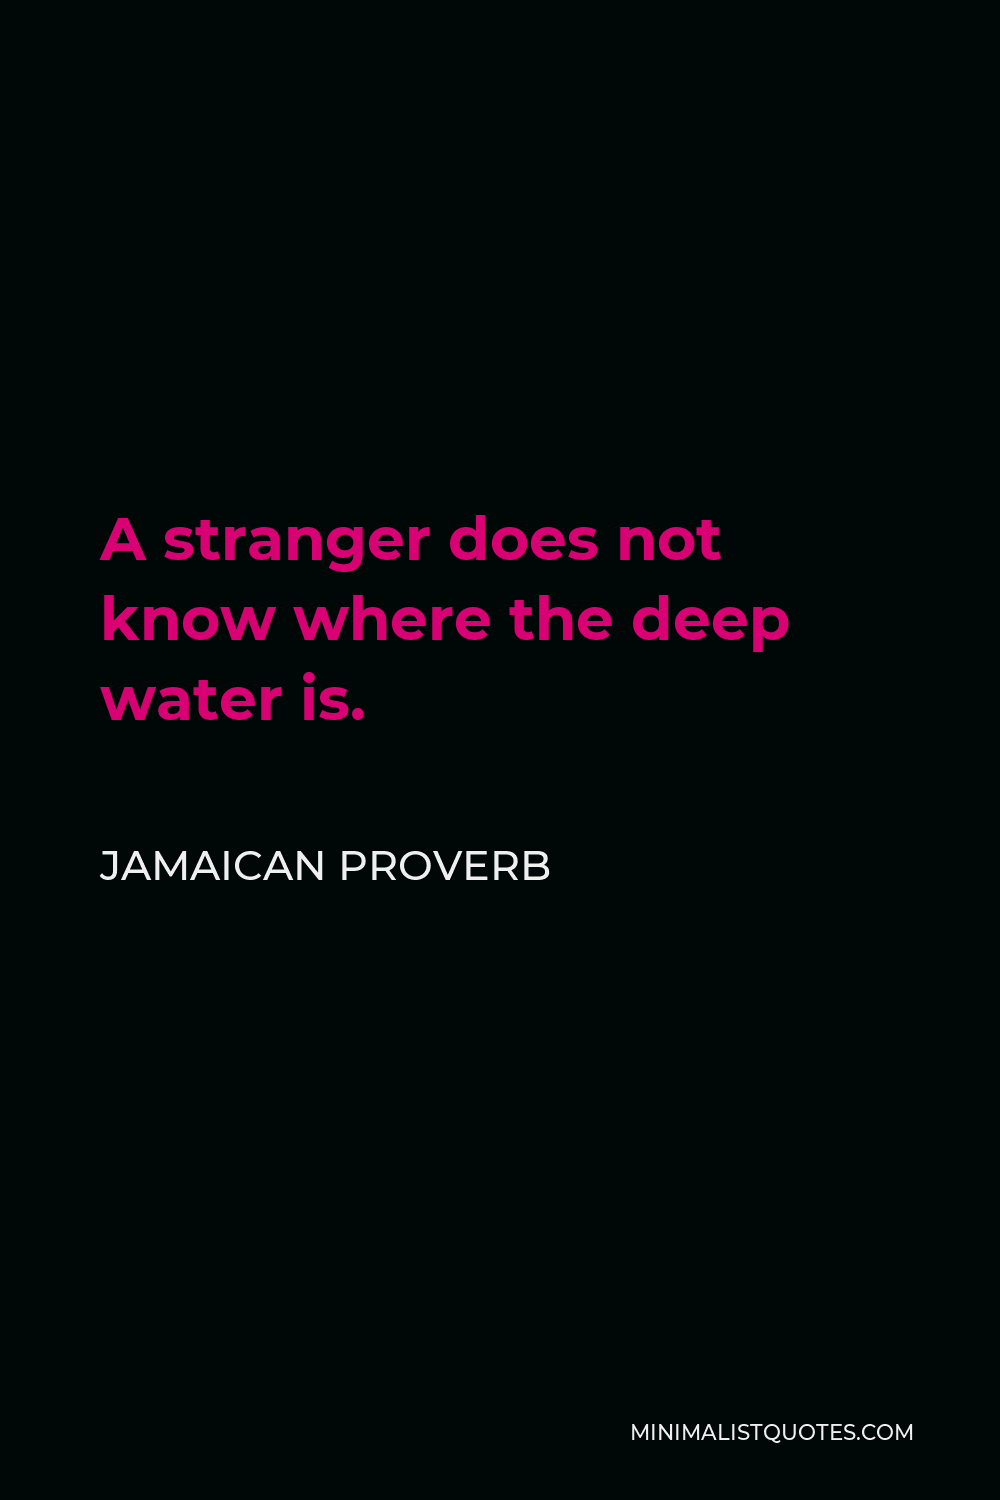 Jamaican Proverb Quote - A stranger does not know where the deep water is.